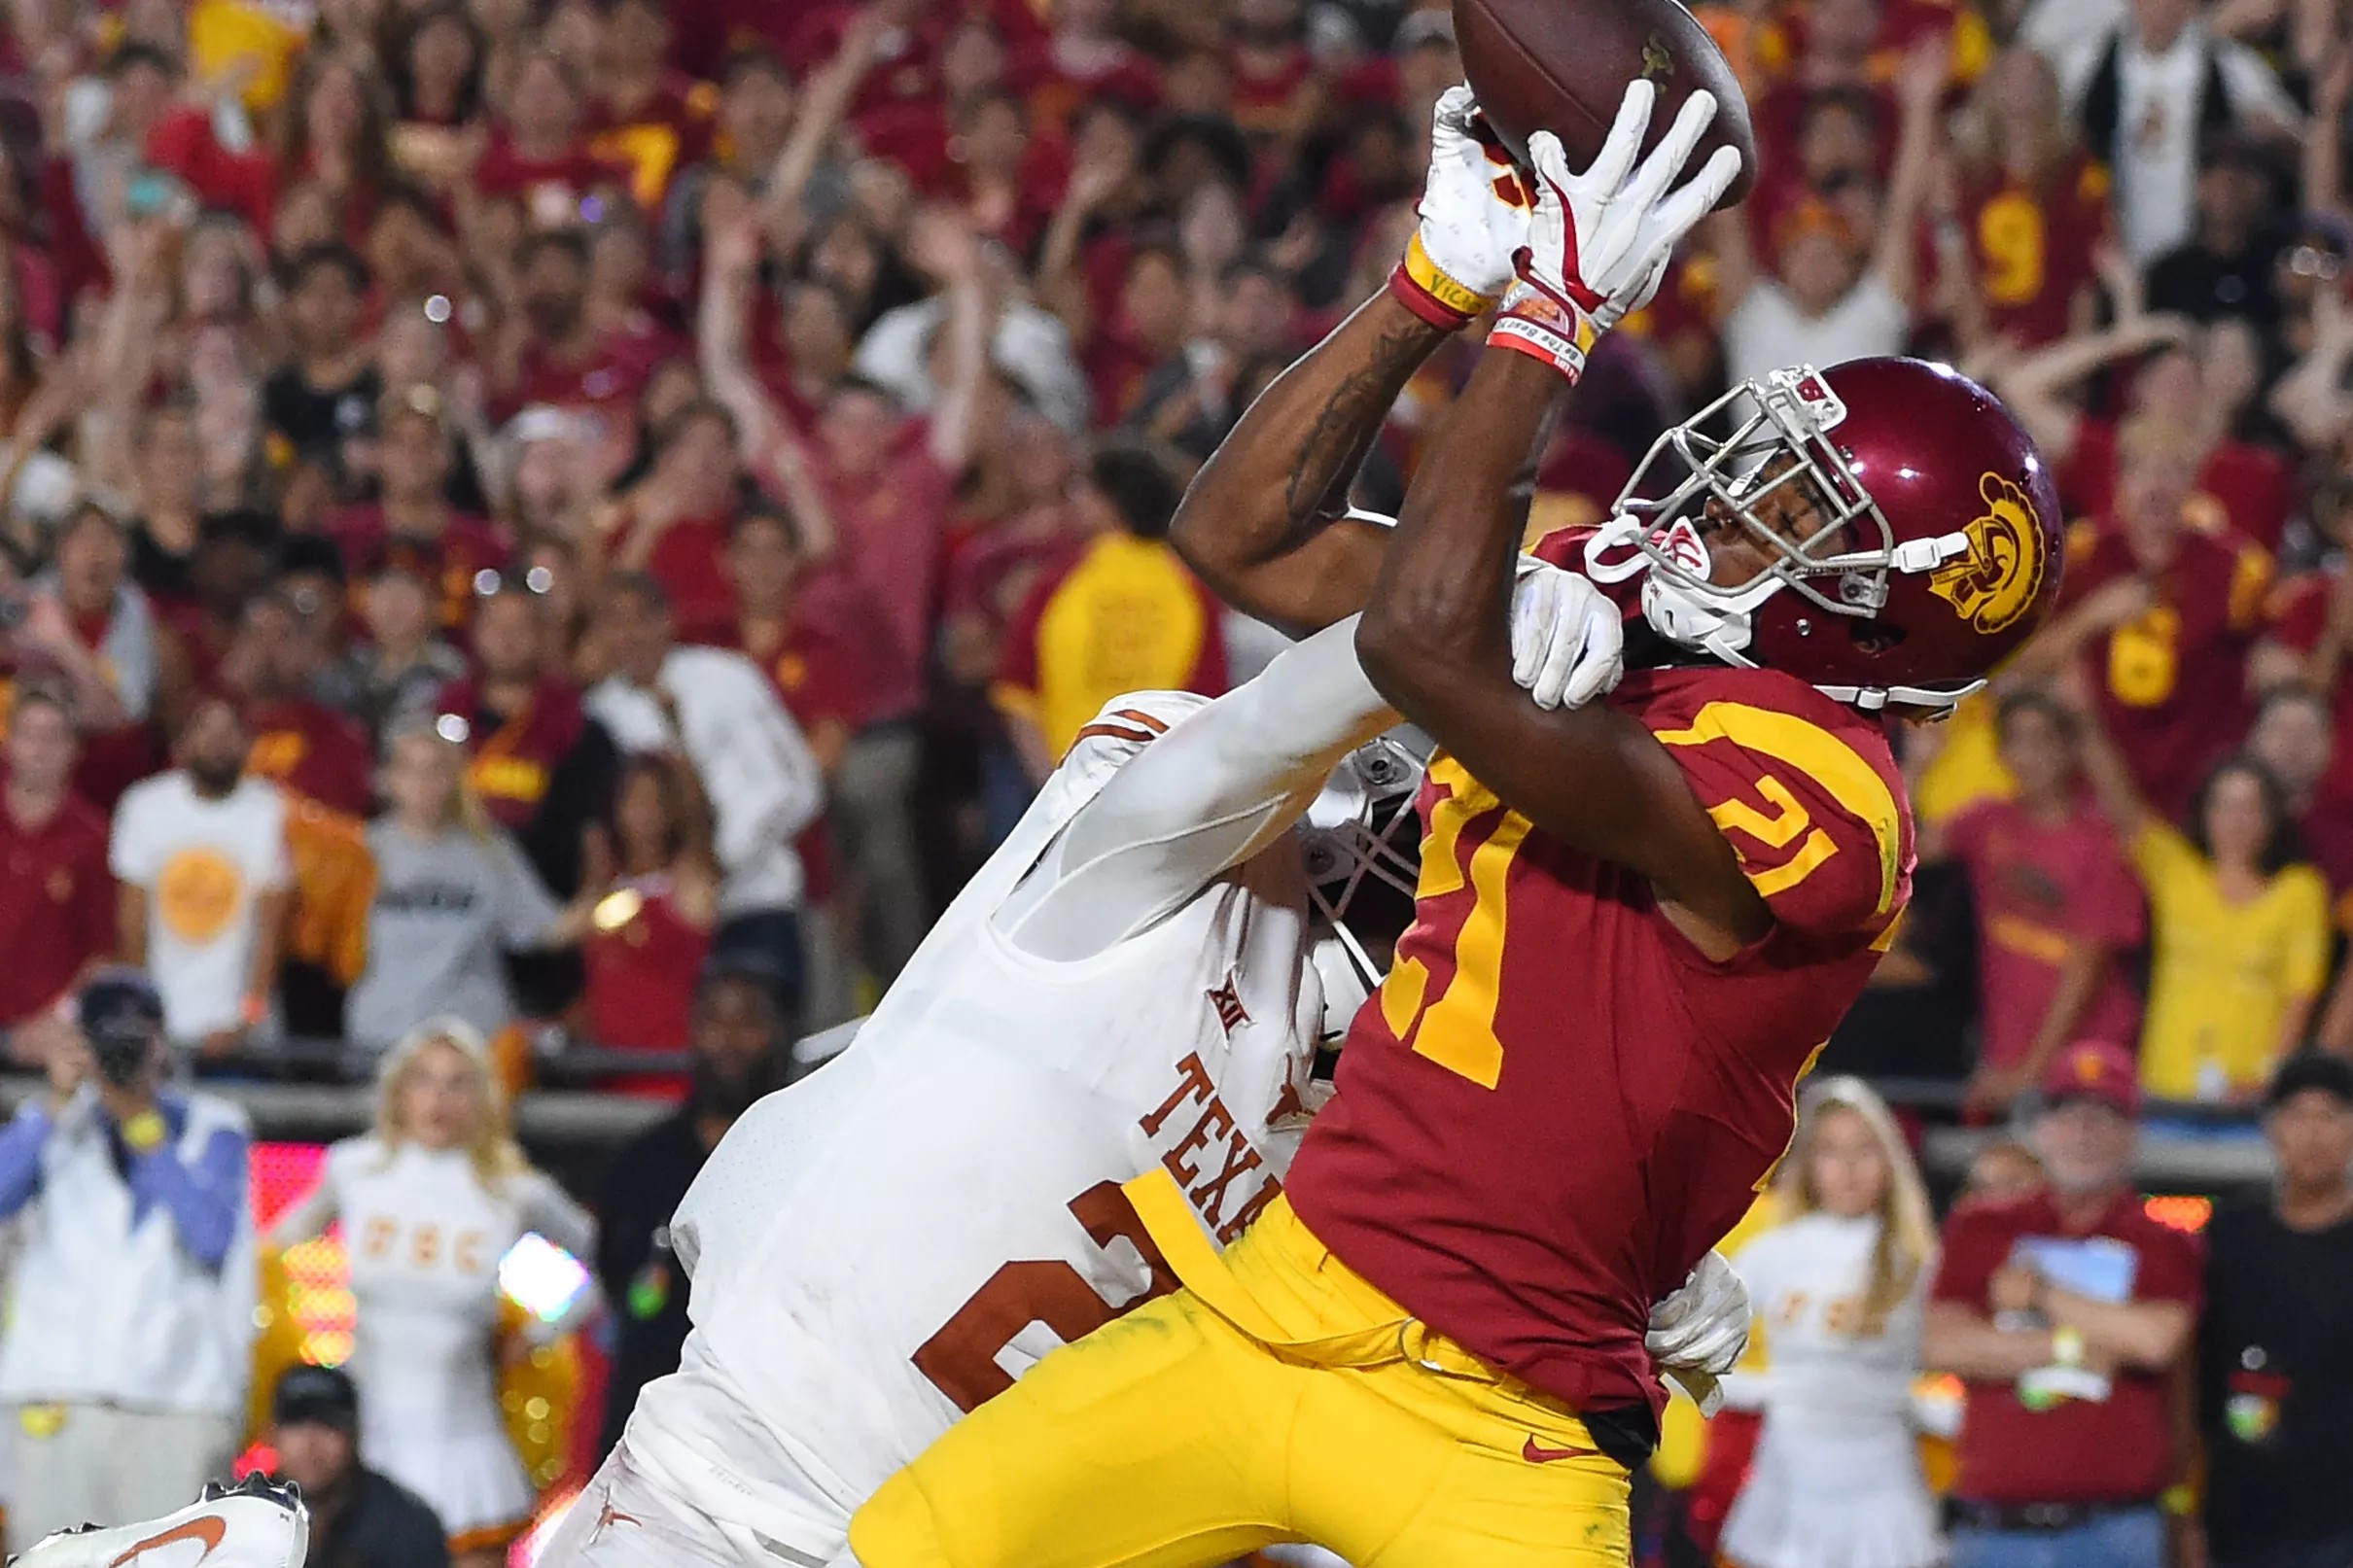 USC Football: Game times announced for first four games of 2018 season